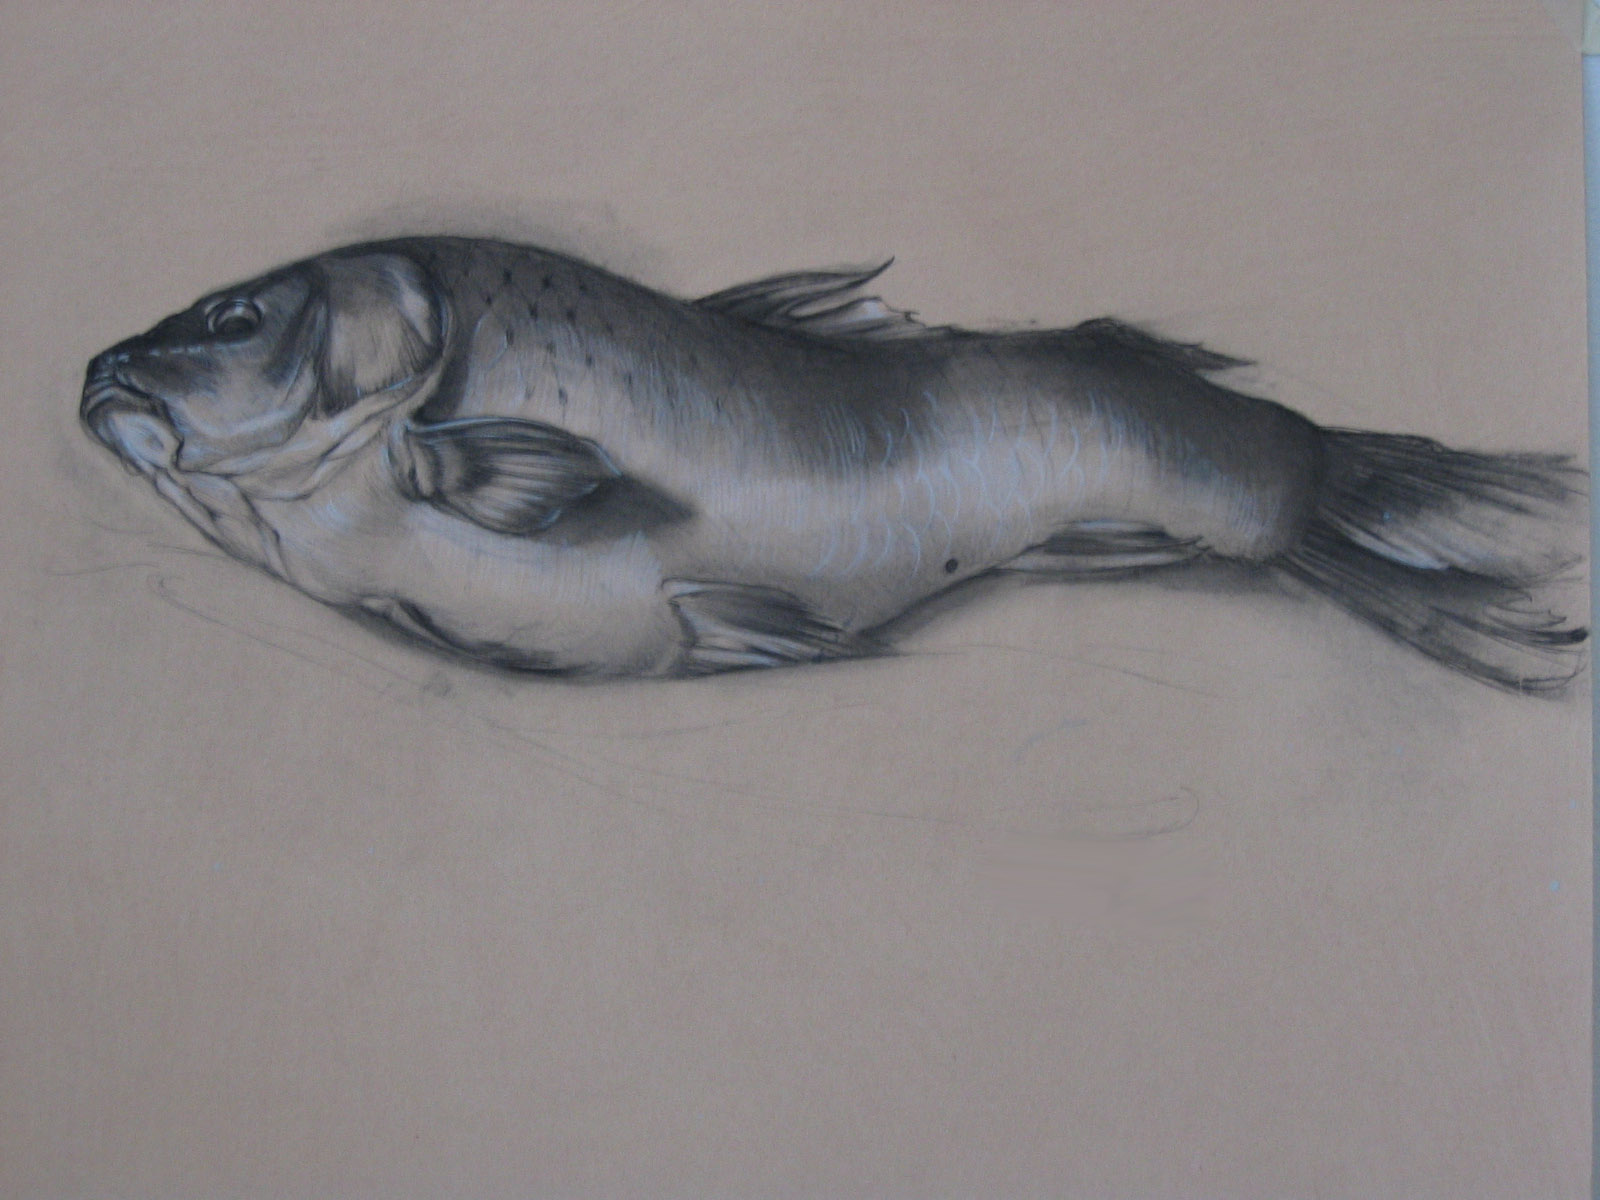 Poisson, charcoal on archival paper, 24 x 19"